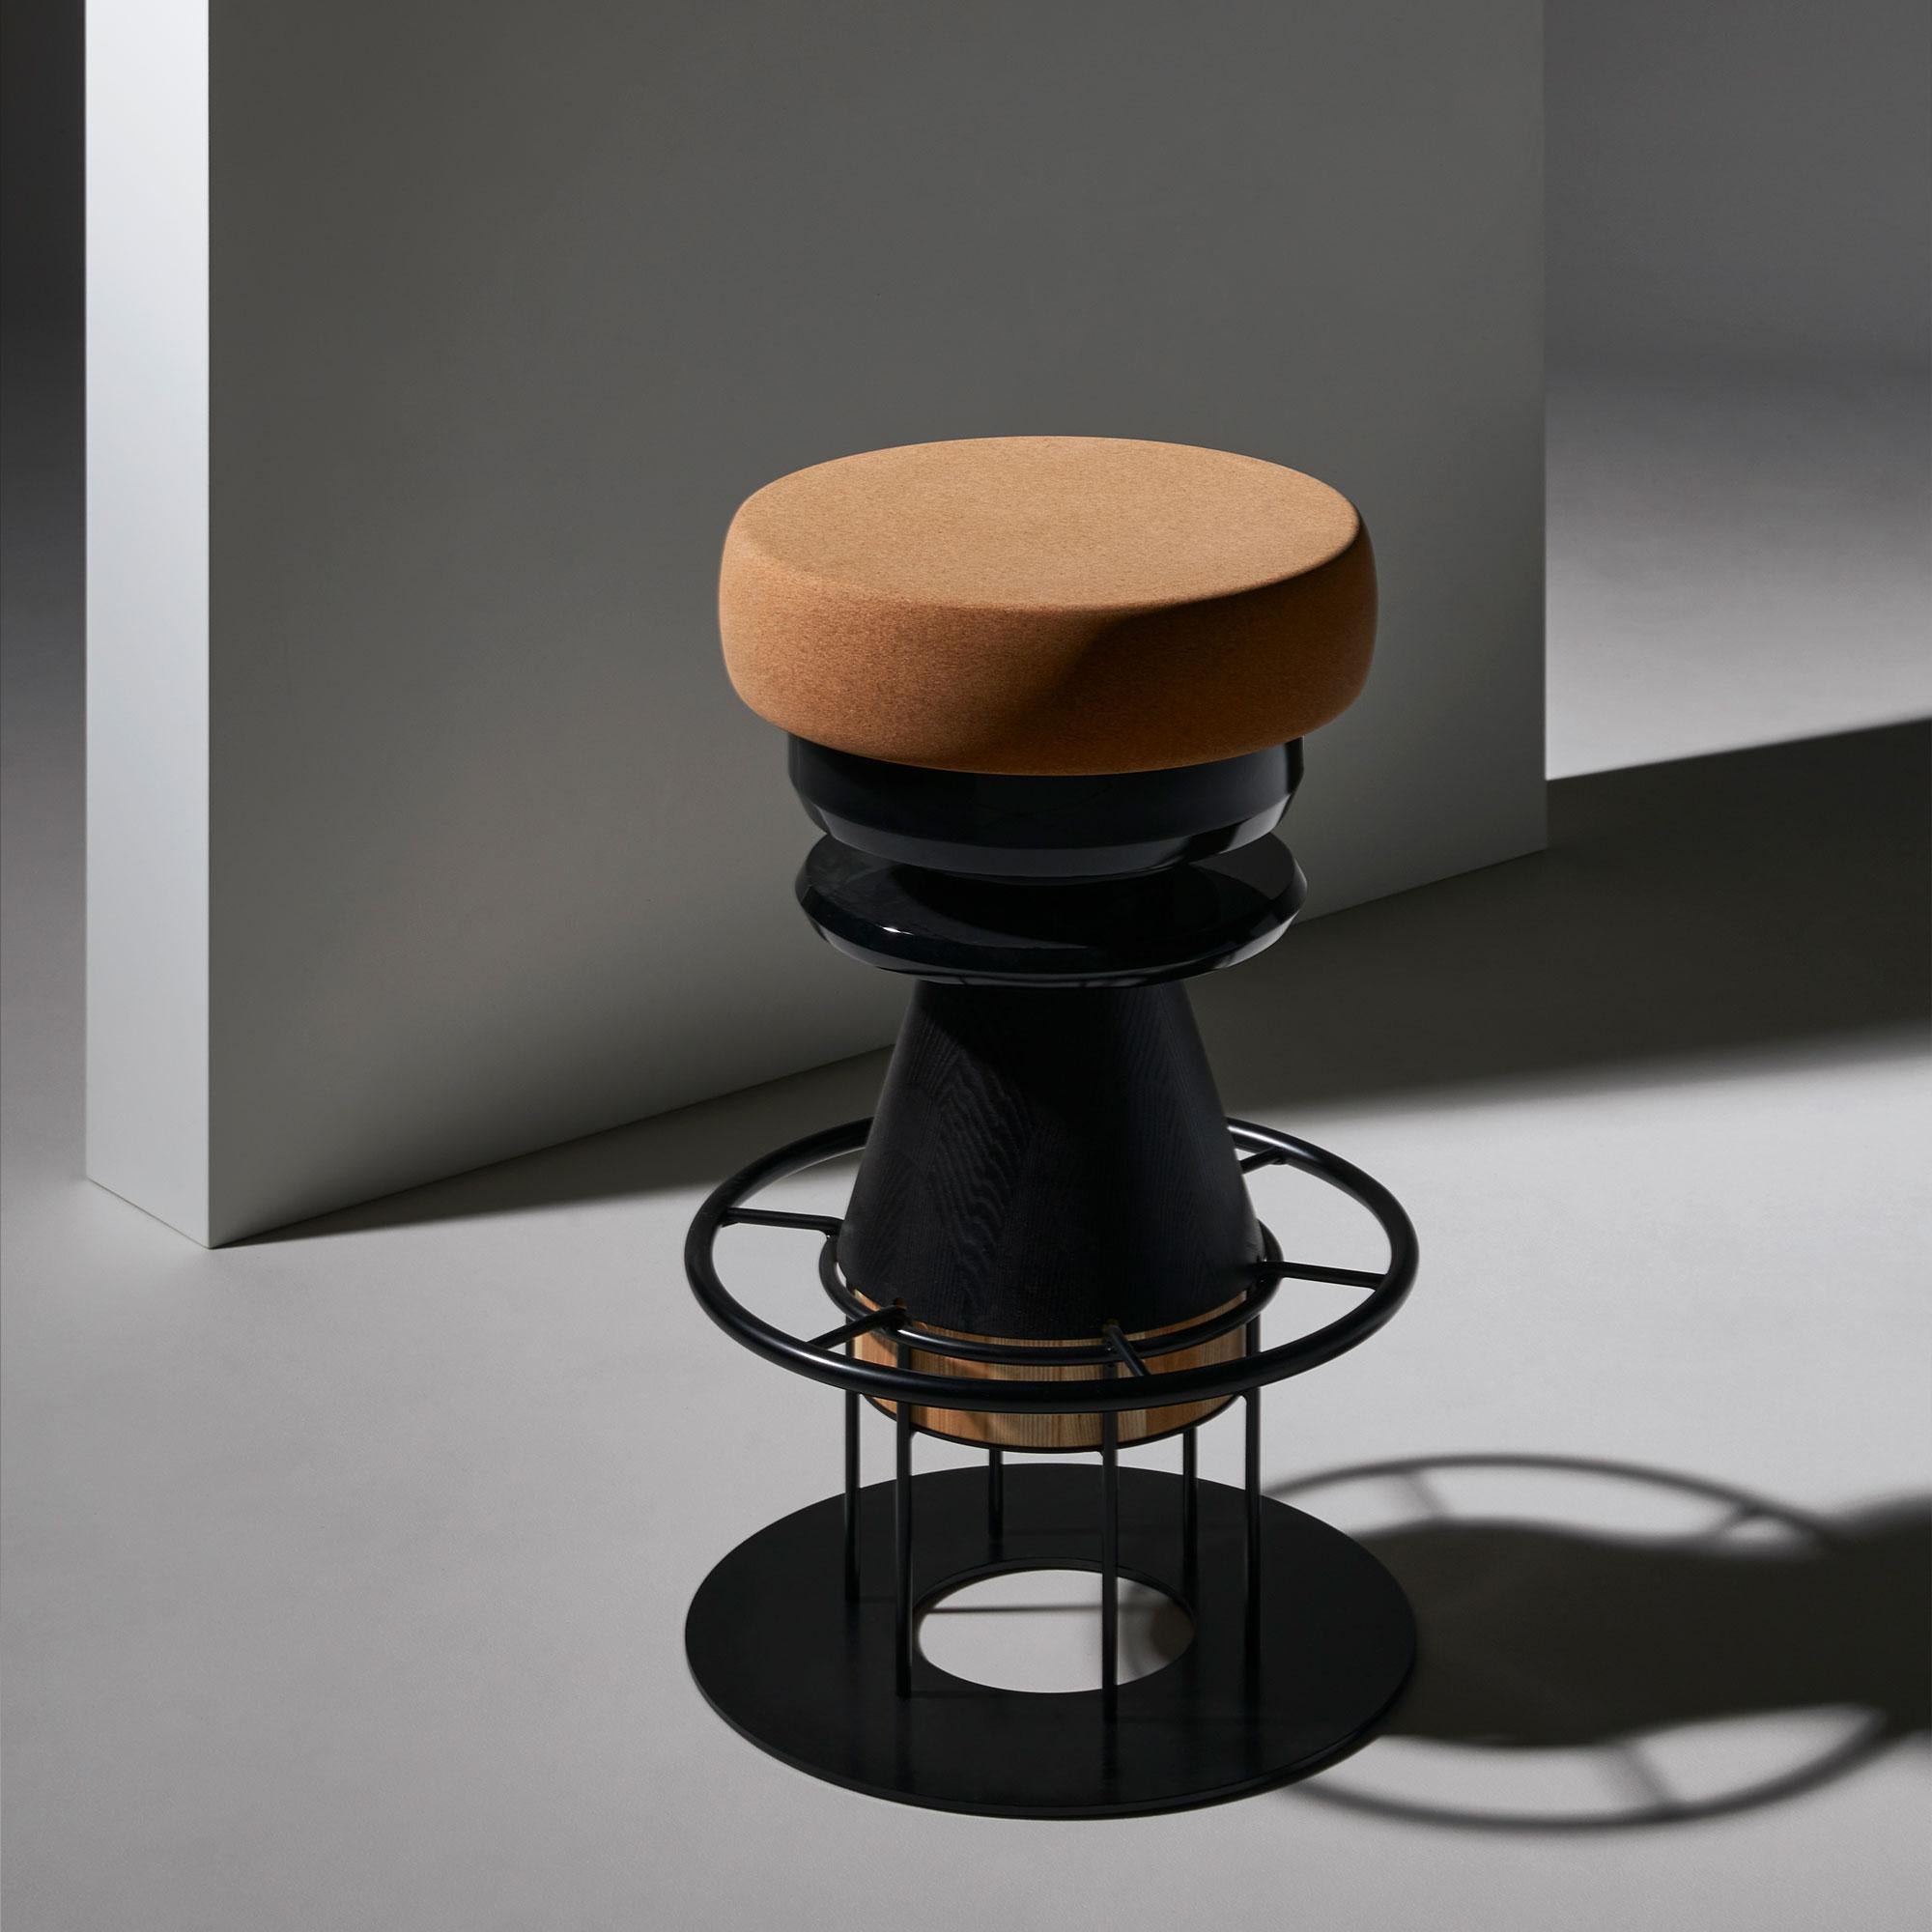 Set of 2 medium black tembo stool, note design studio
Dimensions: D 36 x H 64 cm
Materials: Lacquered steel structure, solid wood (beech) and lacquered MDF, natural cork base.
Available in colorful version and in 3 sizes: H46, H64, H76